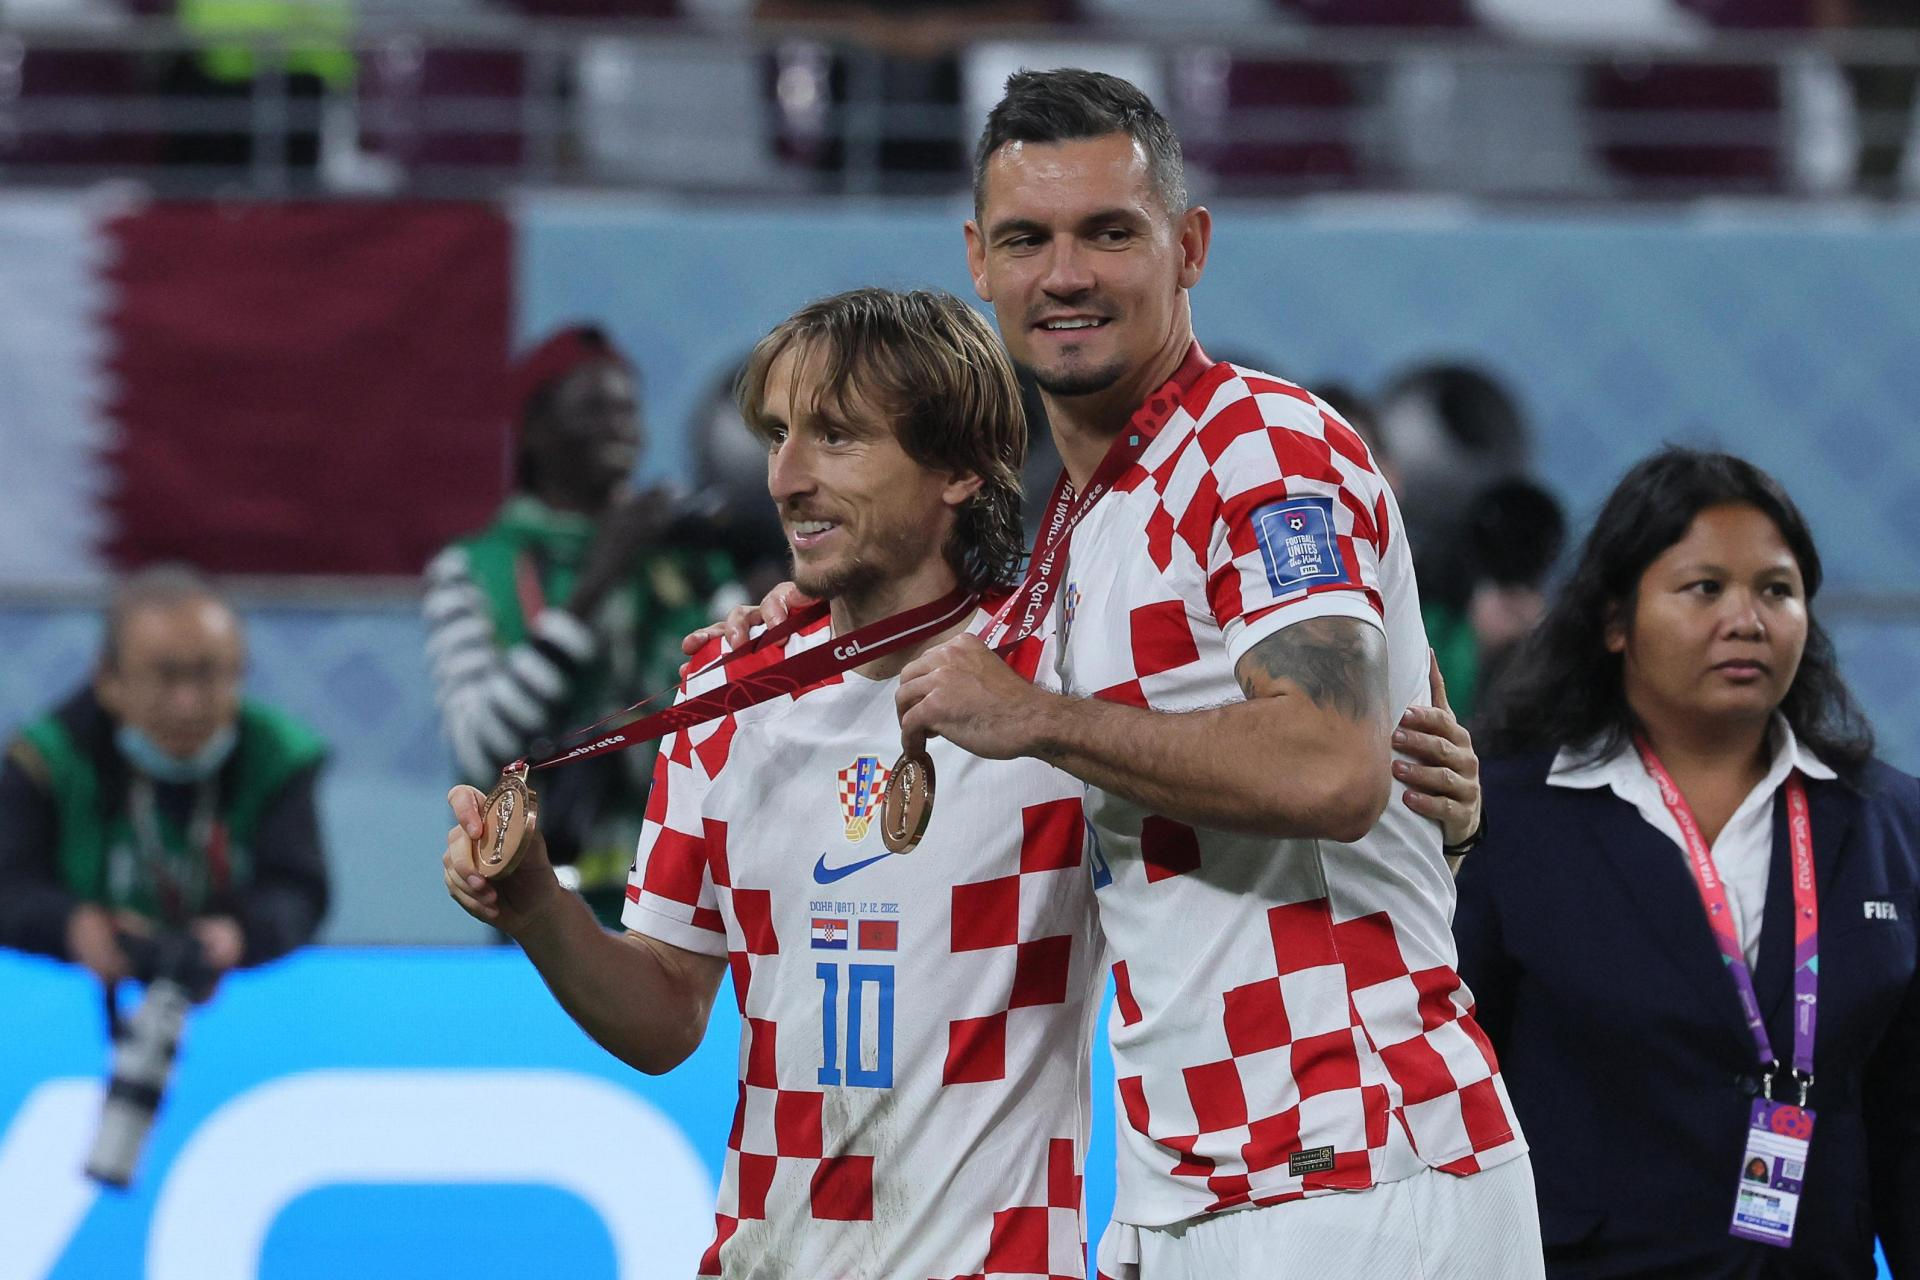 Modrić and Lovren Accused of Perjury in Tax Evasion Case